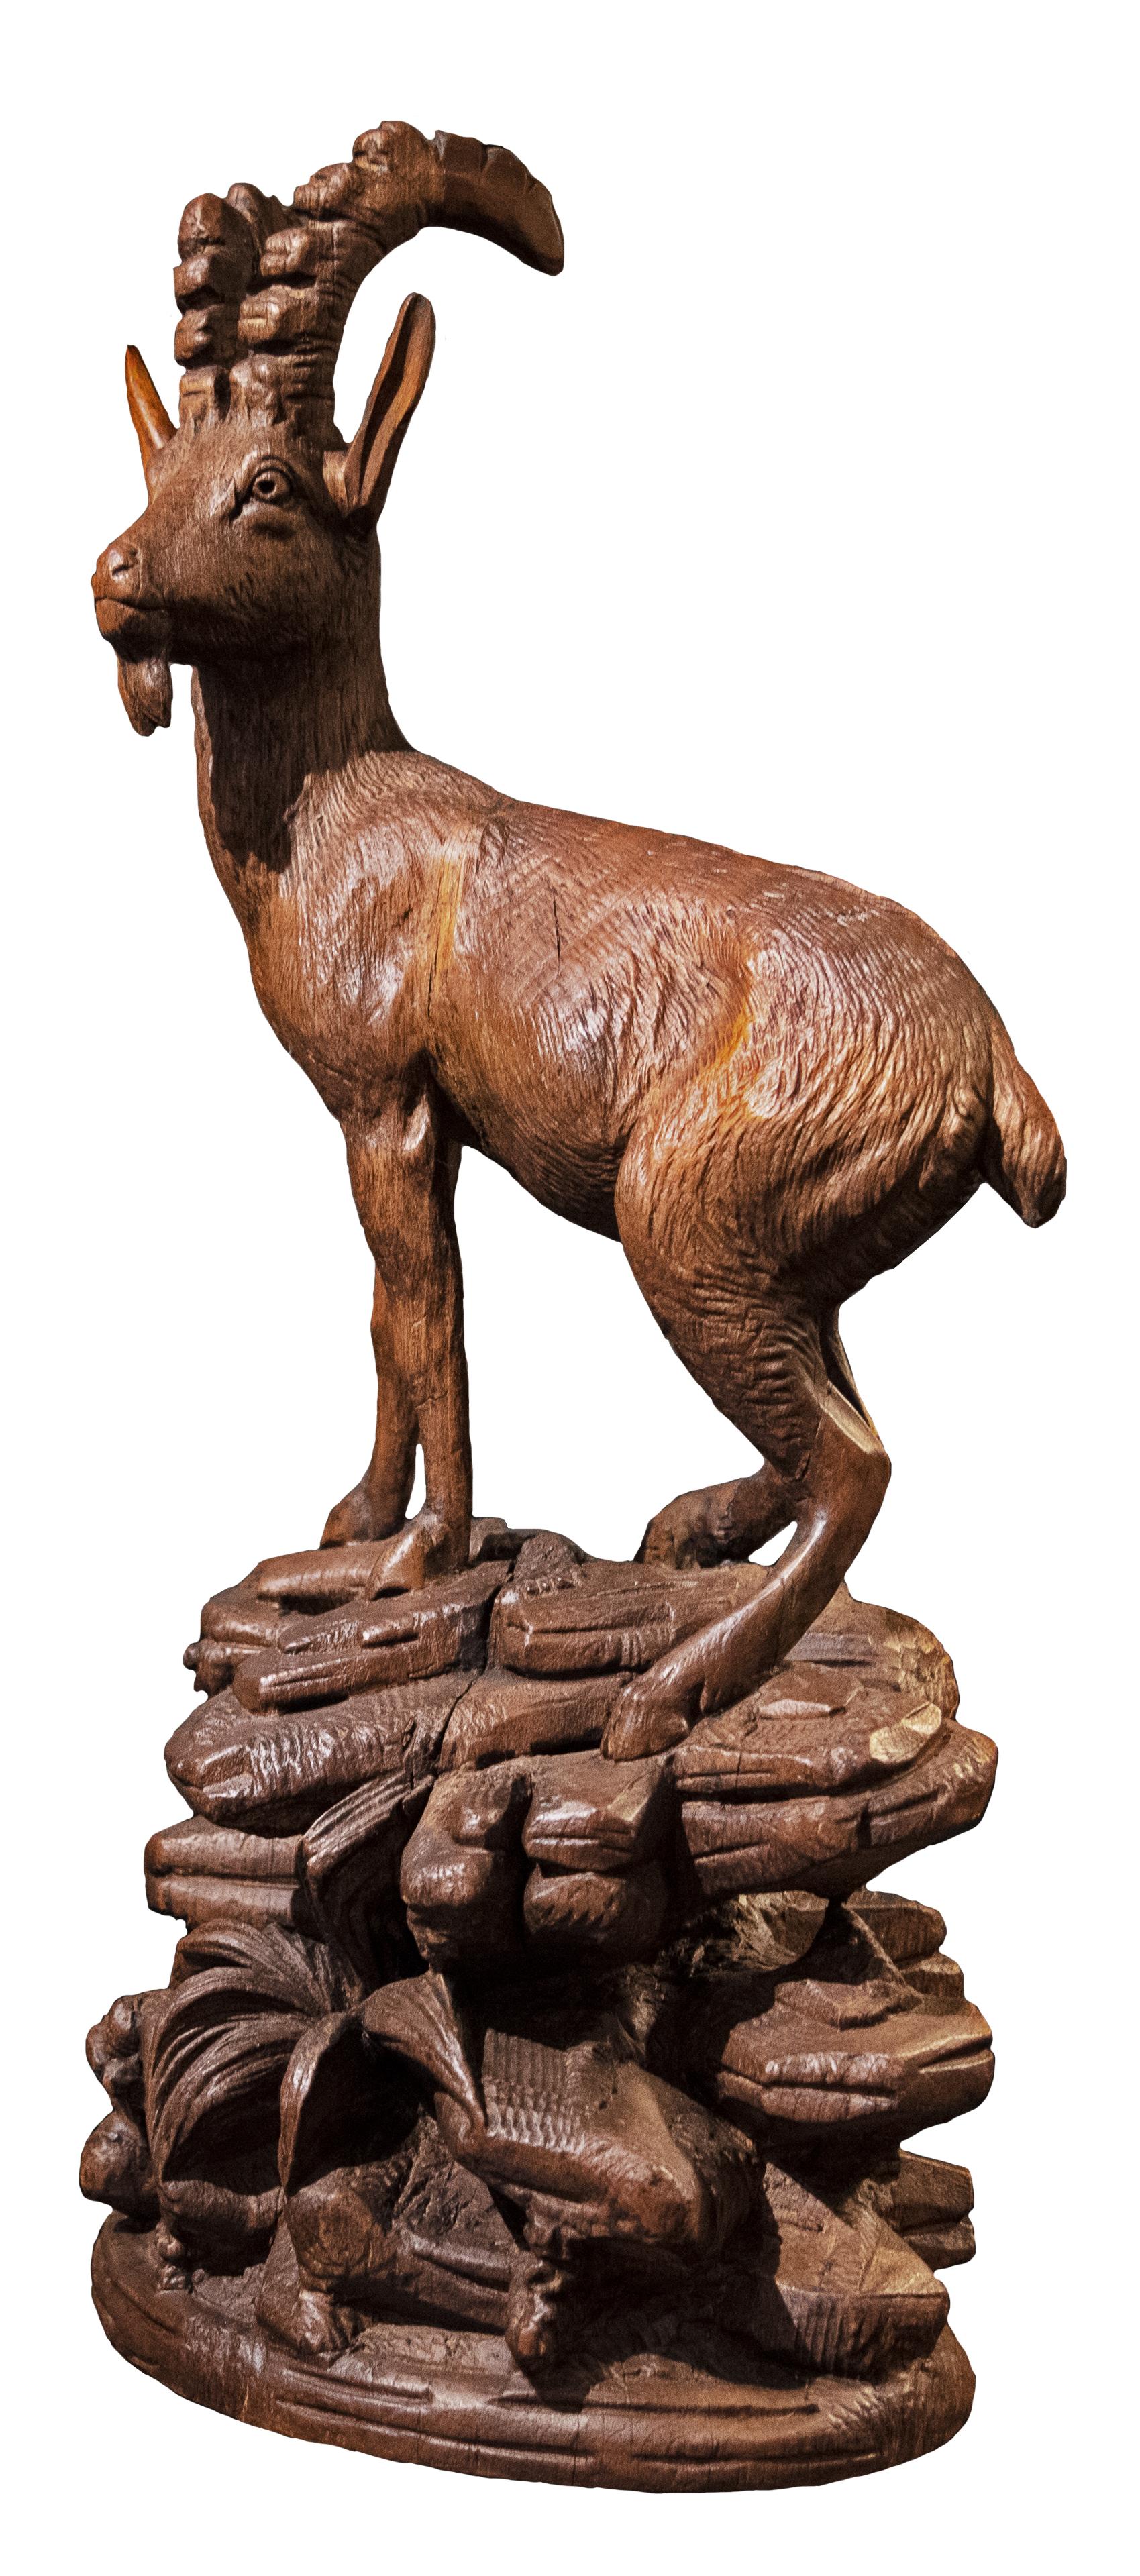 A nineteenth-century Swiss wood sculpture of a bearded ibex atop a rocky landscape.

Carved in the Black Forest style, popular in the late nineteenth century.